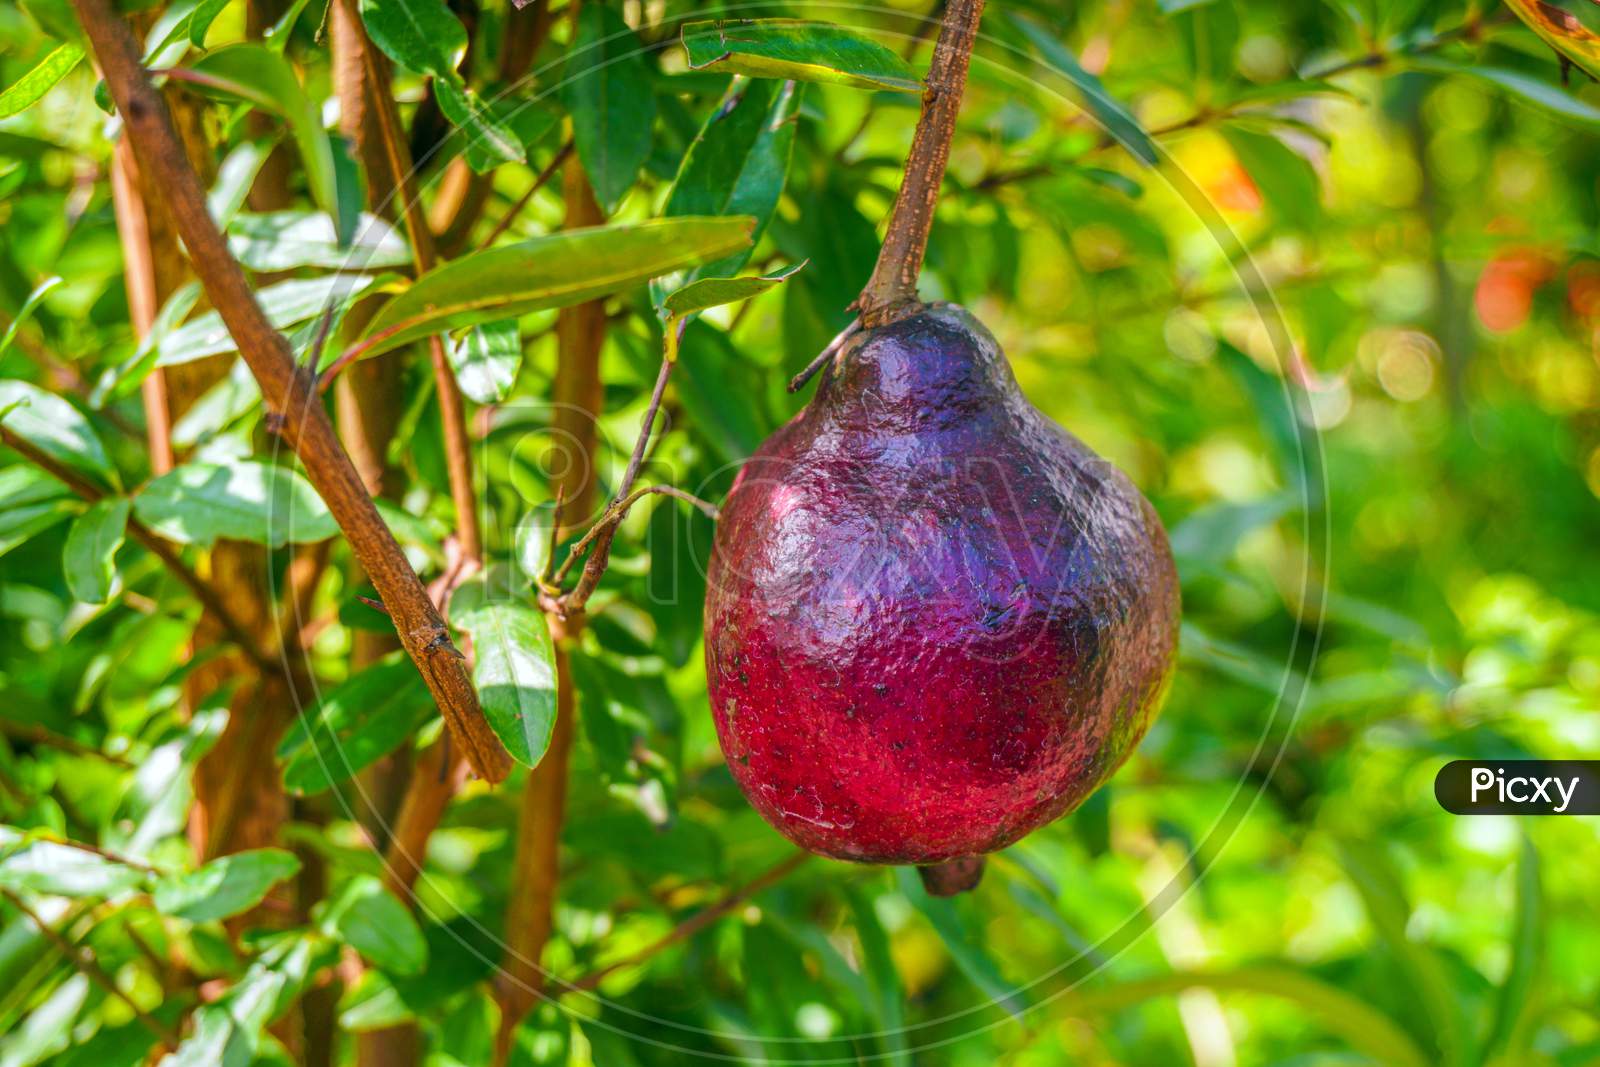 The Red Pomegranate (Punica Granatum) Growing In Your Garden.